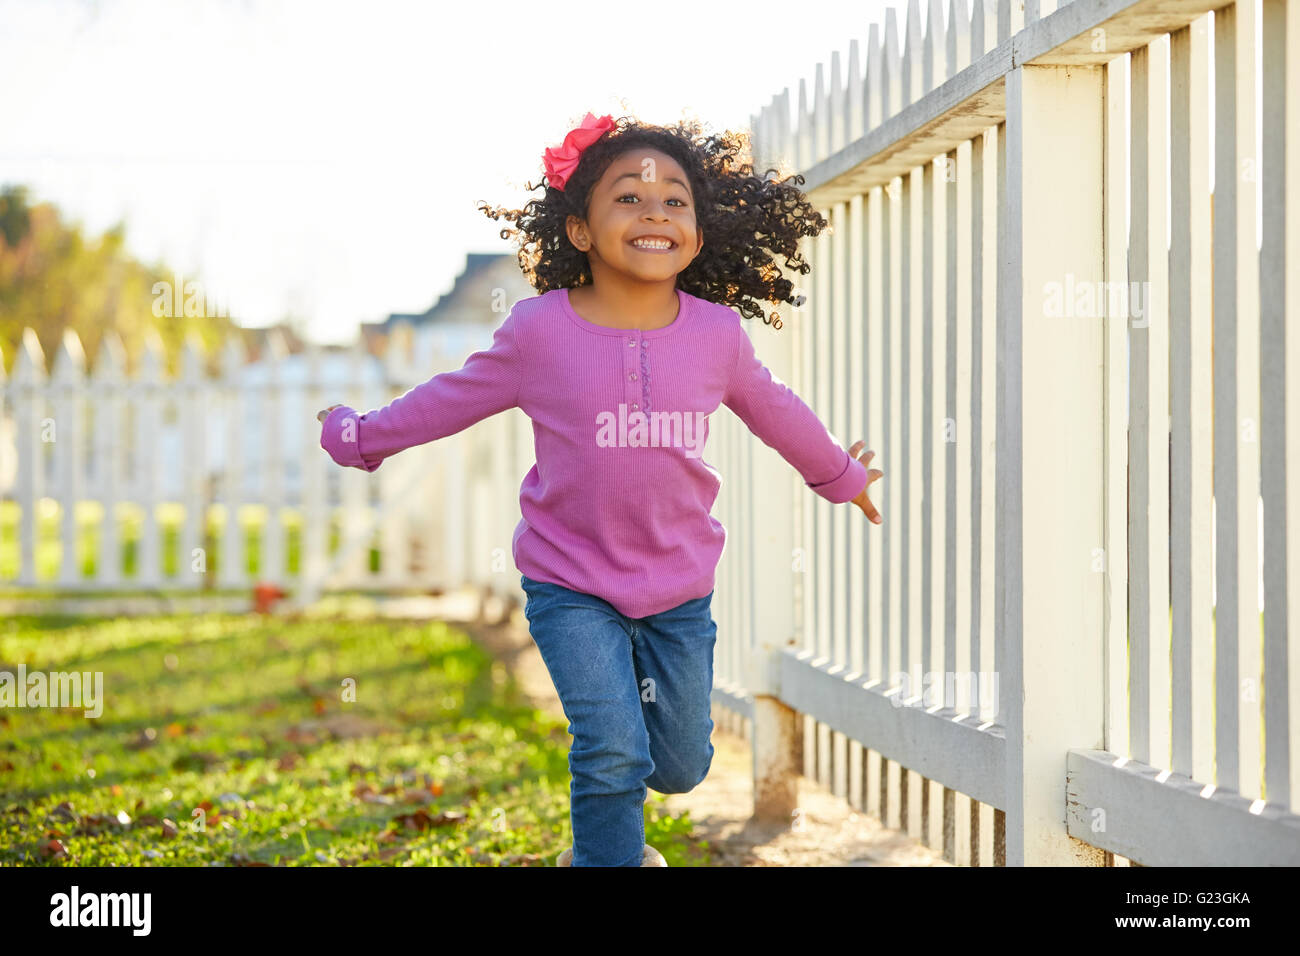 kid girl toddler playing running in park outdoor latin ethnicity Stock Photo